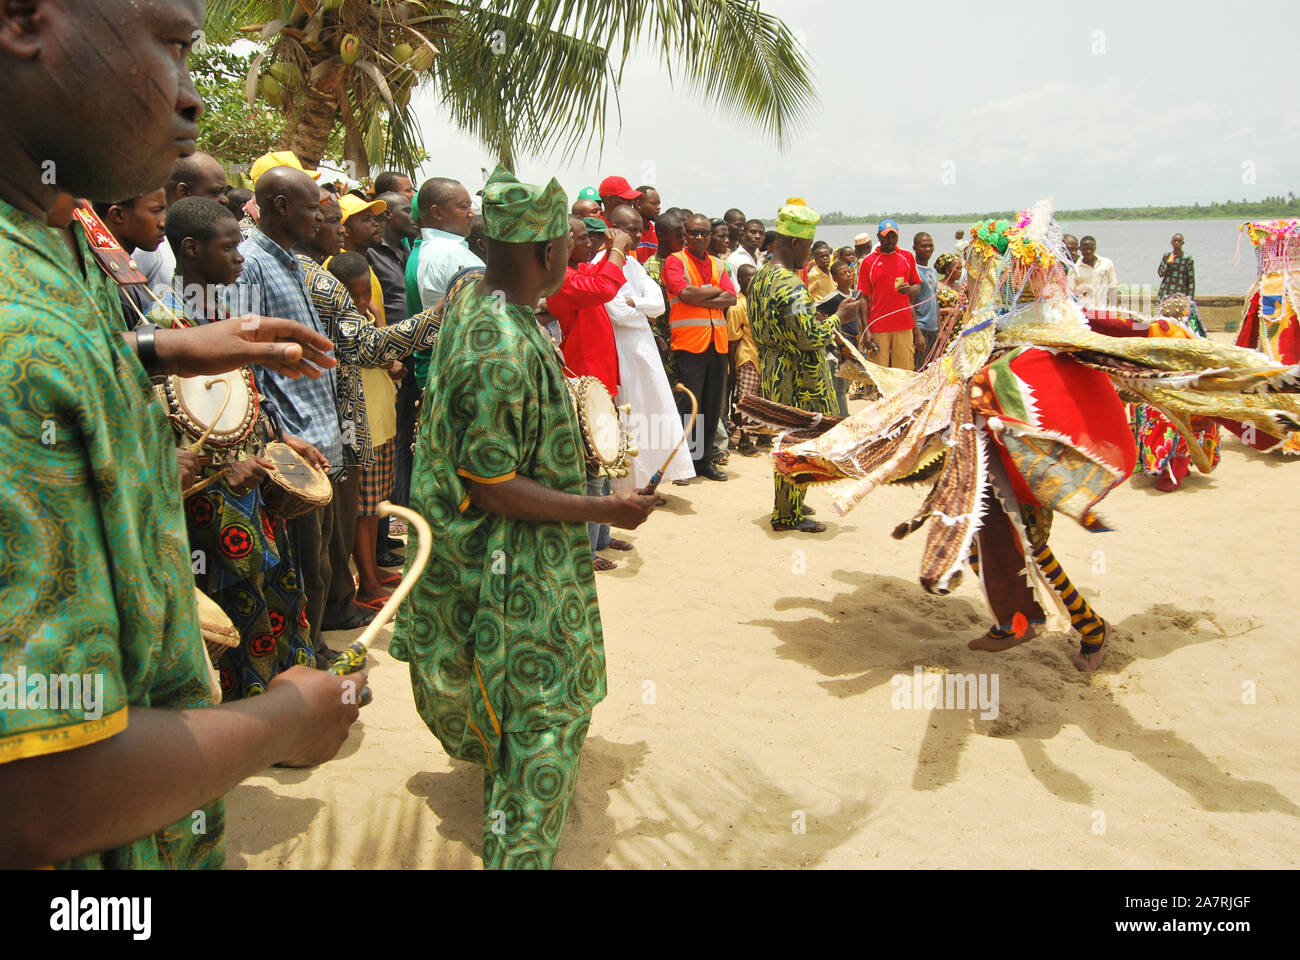 ORI-ADE Masks dancing at the Bank of Badagry Historical Slave Trade Beach during the Annual Lagos Black Heritage Festival. The Masquerades are popularly celebrated among Yoruba people of southwest Nigeria for ritual purposes and entertainment. Stock Photo